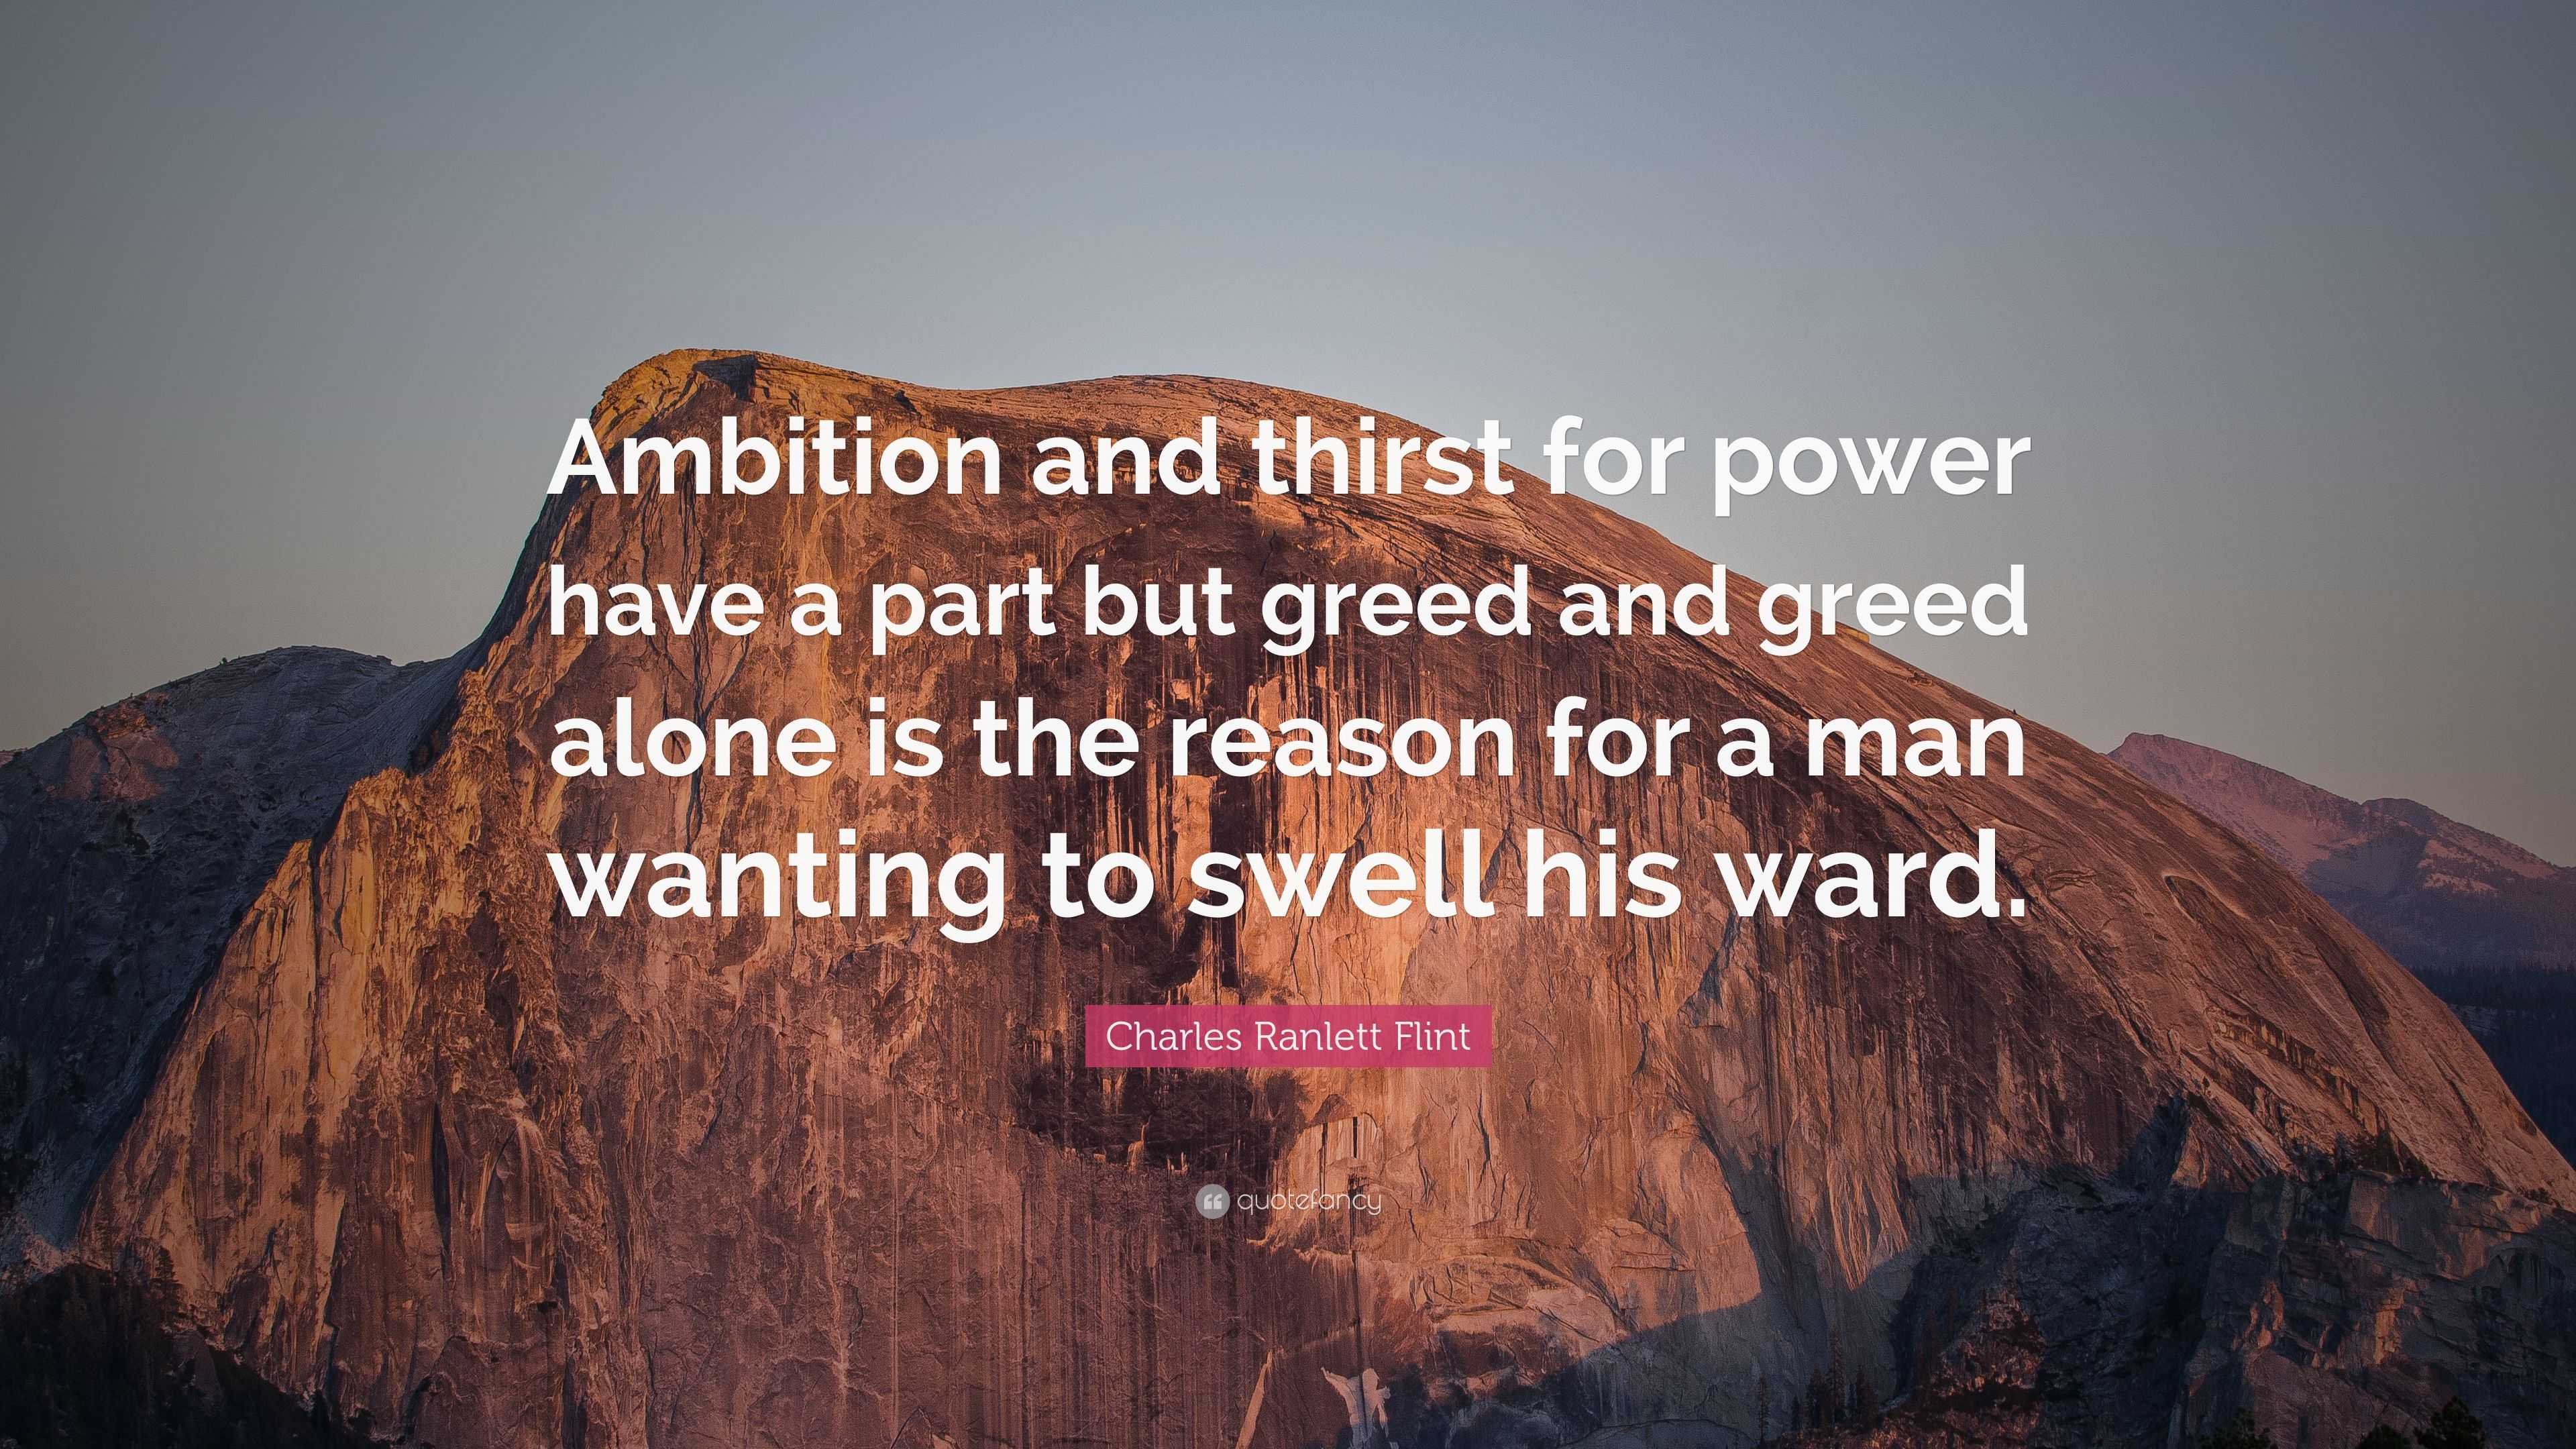 Charles Ranlett Flint Quote: “Ambition and thirst for power have a part ...